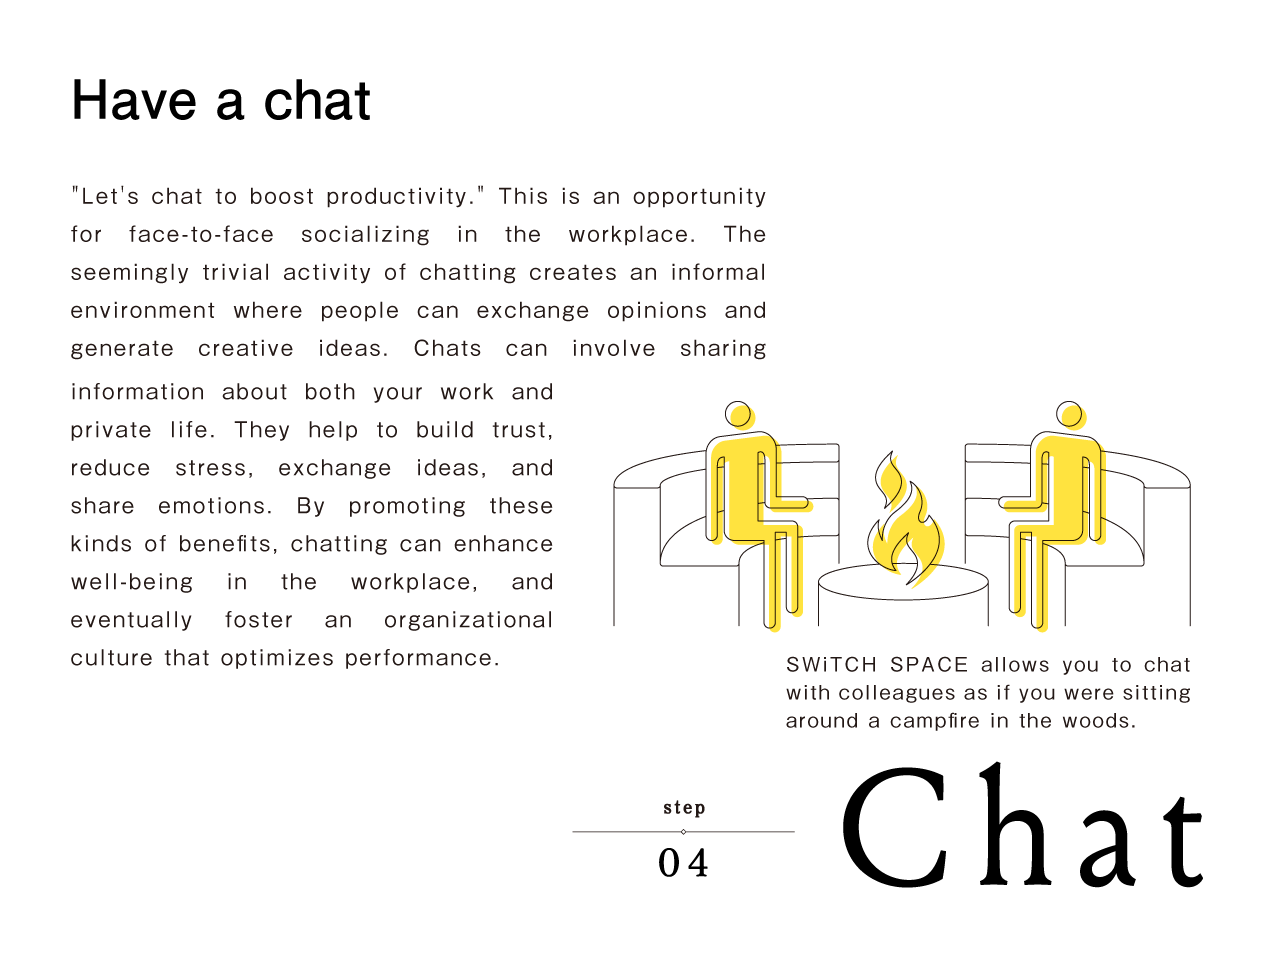 step04 Chat | Have a chat　'Let's chat to boost productivity.' This is an opportunity for face-to-face socializing in the workplace. The seemingly trivial activity of chatting creates an informal environment where people can exchange opinions and generate creative ideas. Chats can involve sharing information about both your work and private life. They help to build trust, reduce stress, exchange ideas, and share emotions. By promoting these kinds of benefits, chatting can enhance well-being in the workplace, and eventually foster an organizational culture that optimizes performance.SWiTCH SPACE allows you to chat with colleagues as if you were sitting around a campfire in the woods.